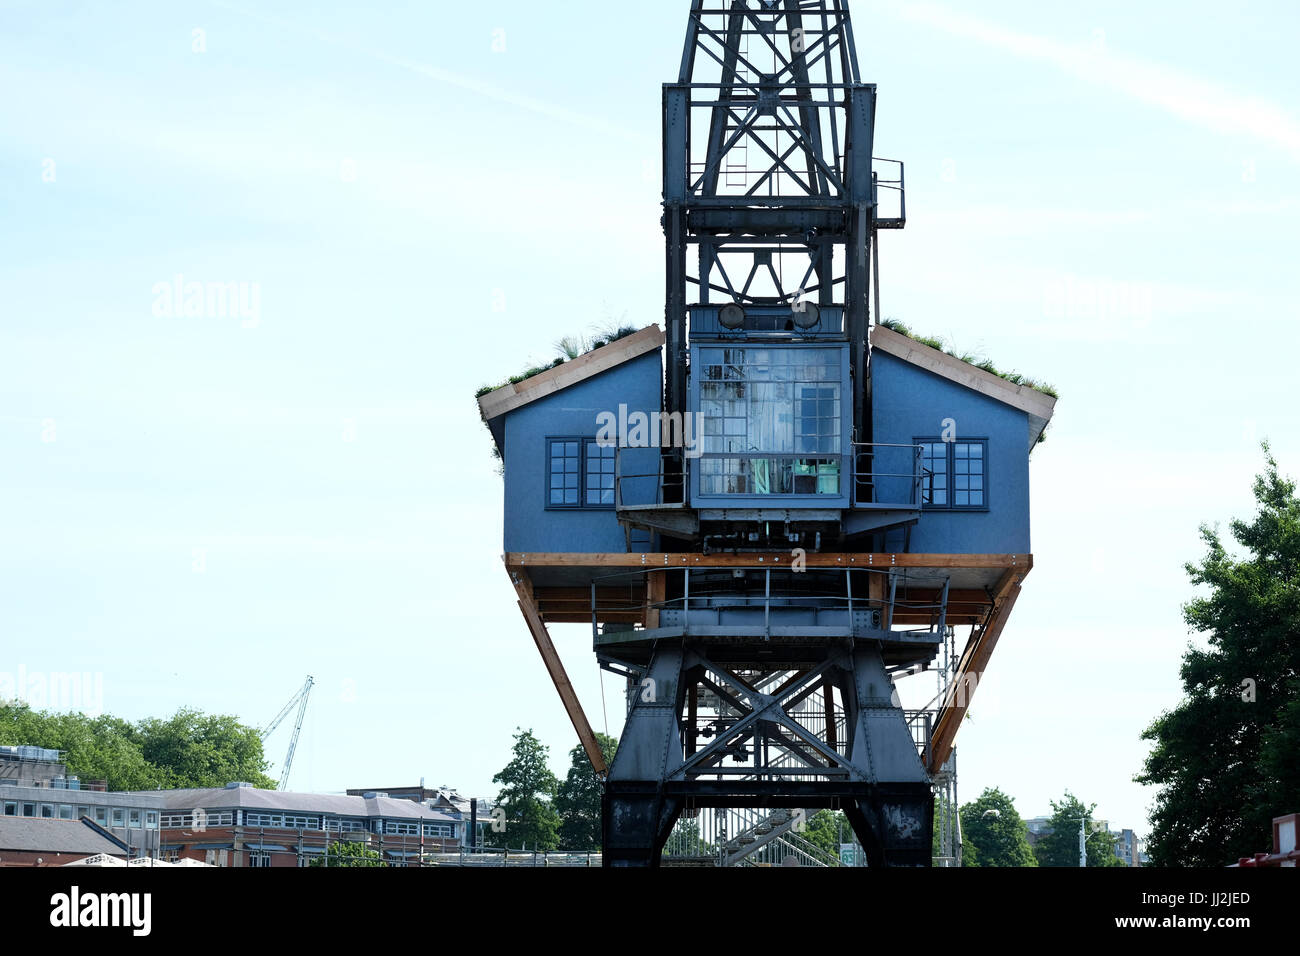 A wooden house constructed half way up and old Bristol Dock crane in Bristol docks, UK Stock Photo